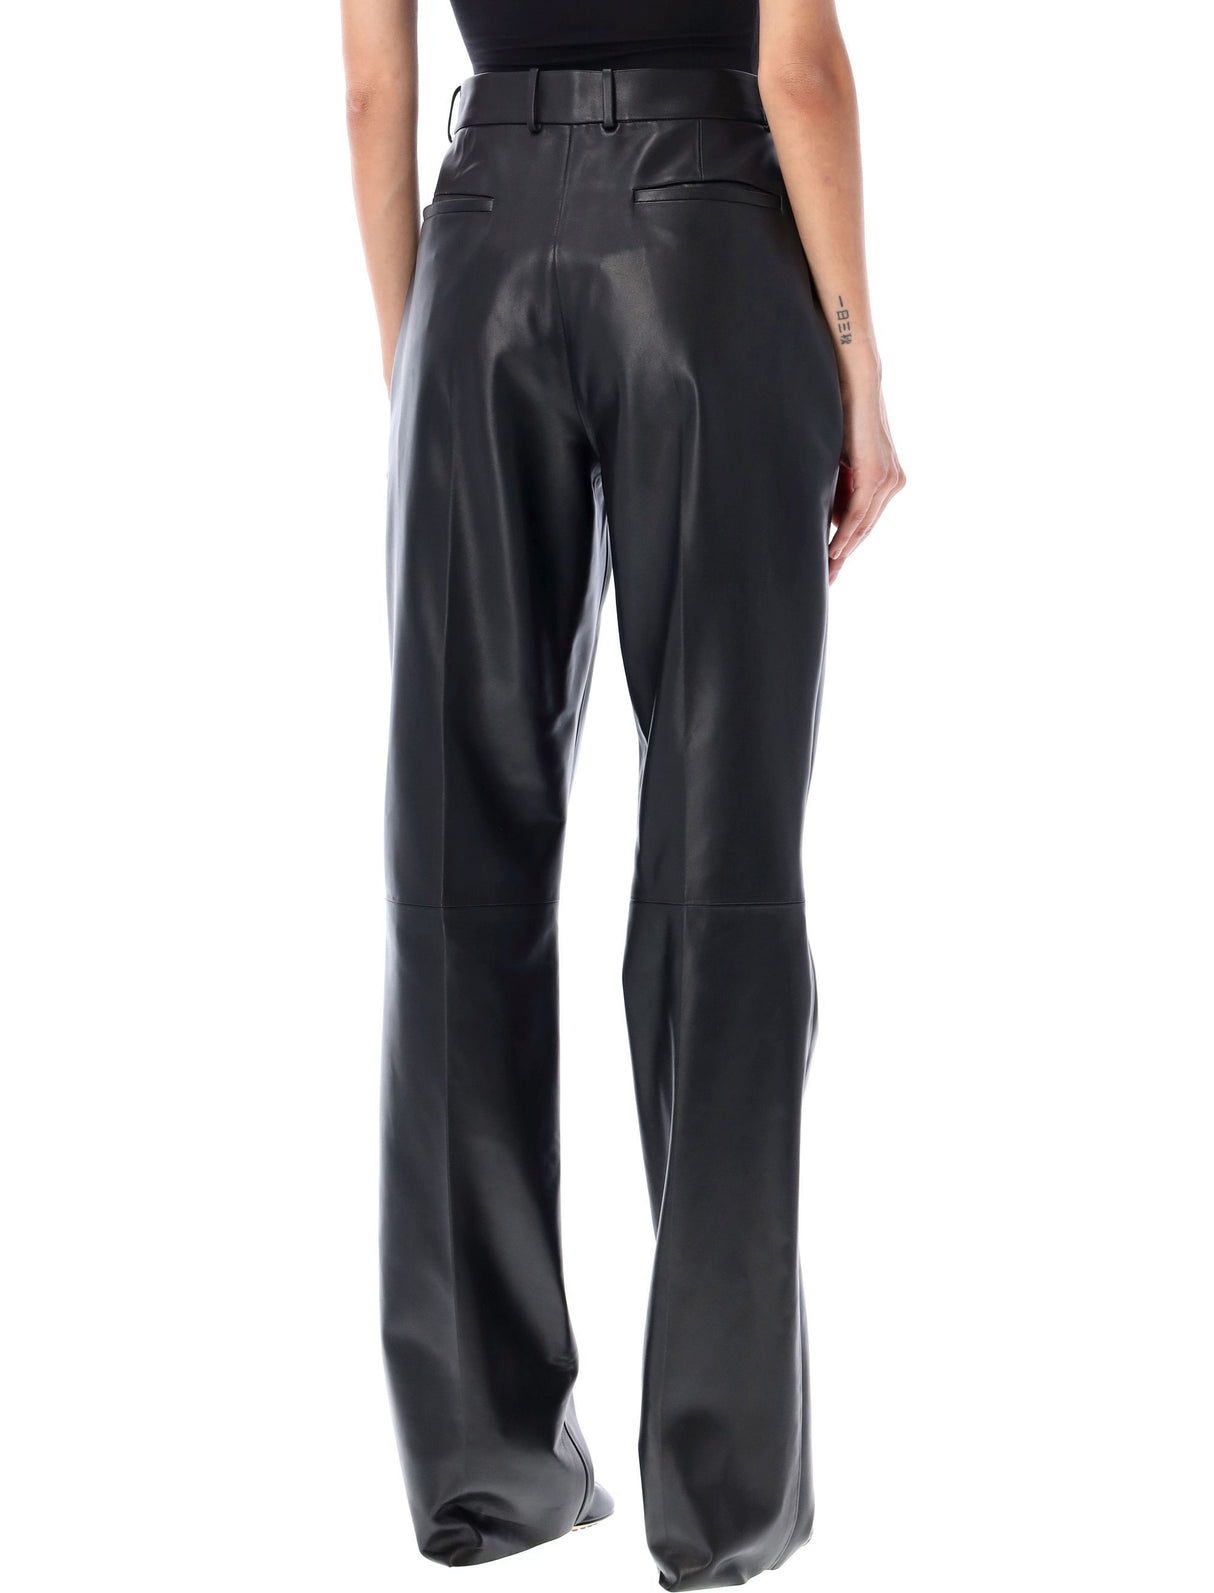 Genuine Leather Pants for Women by a Top Luxury Designer